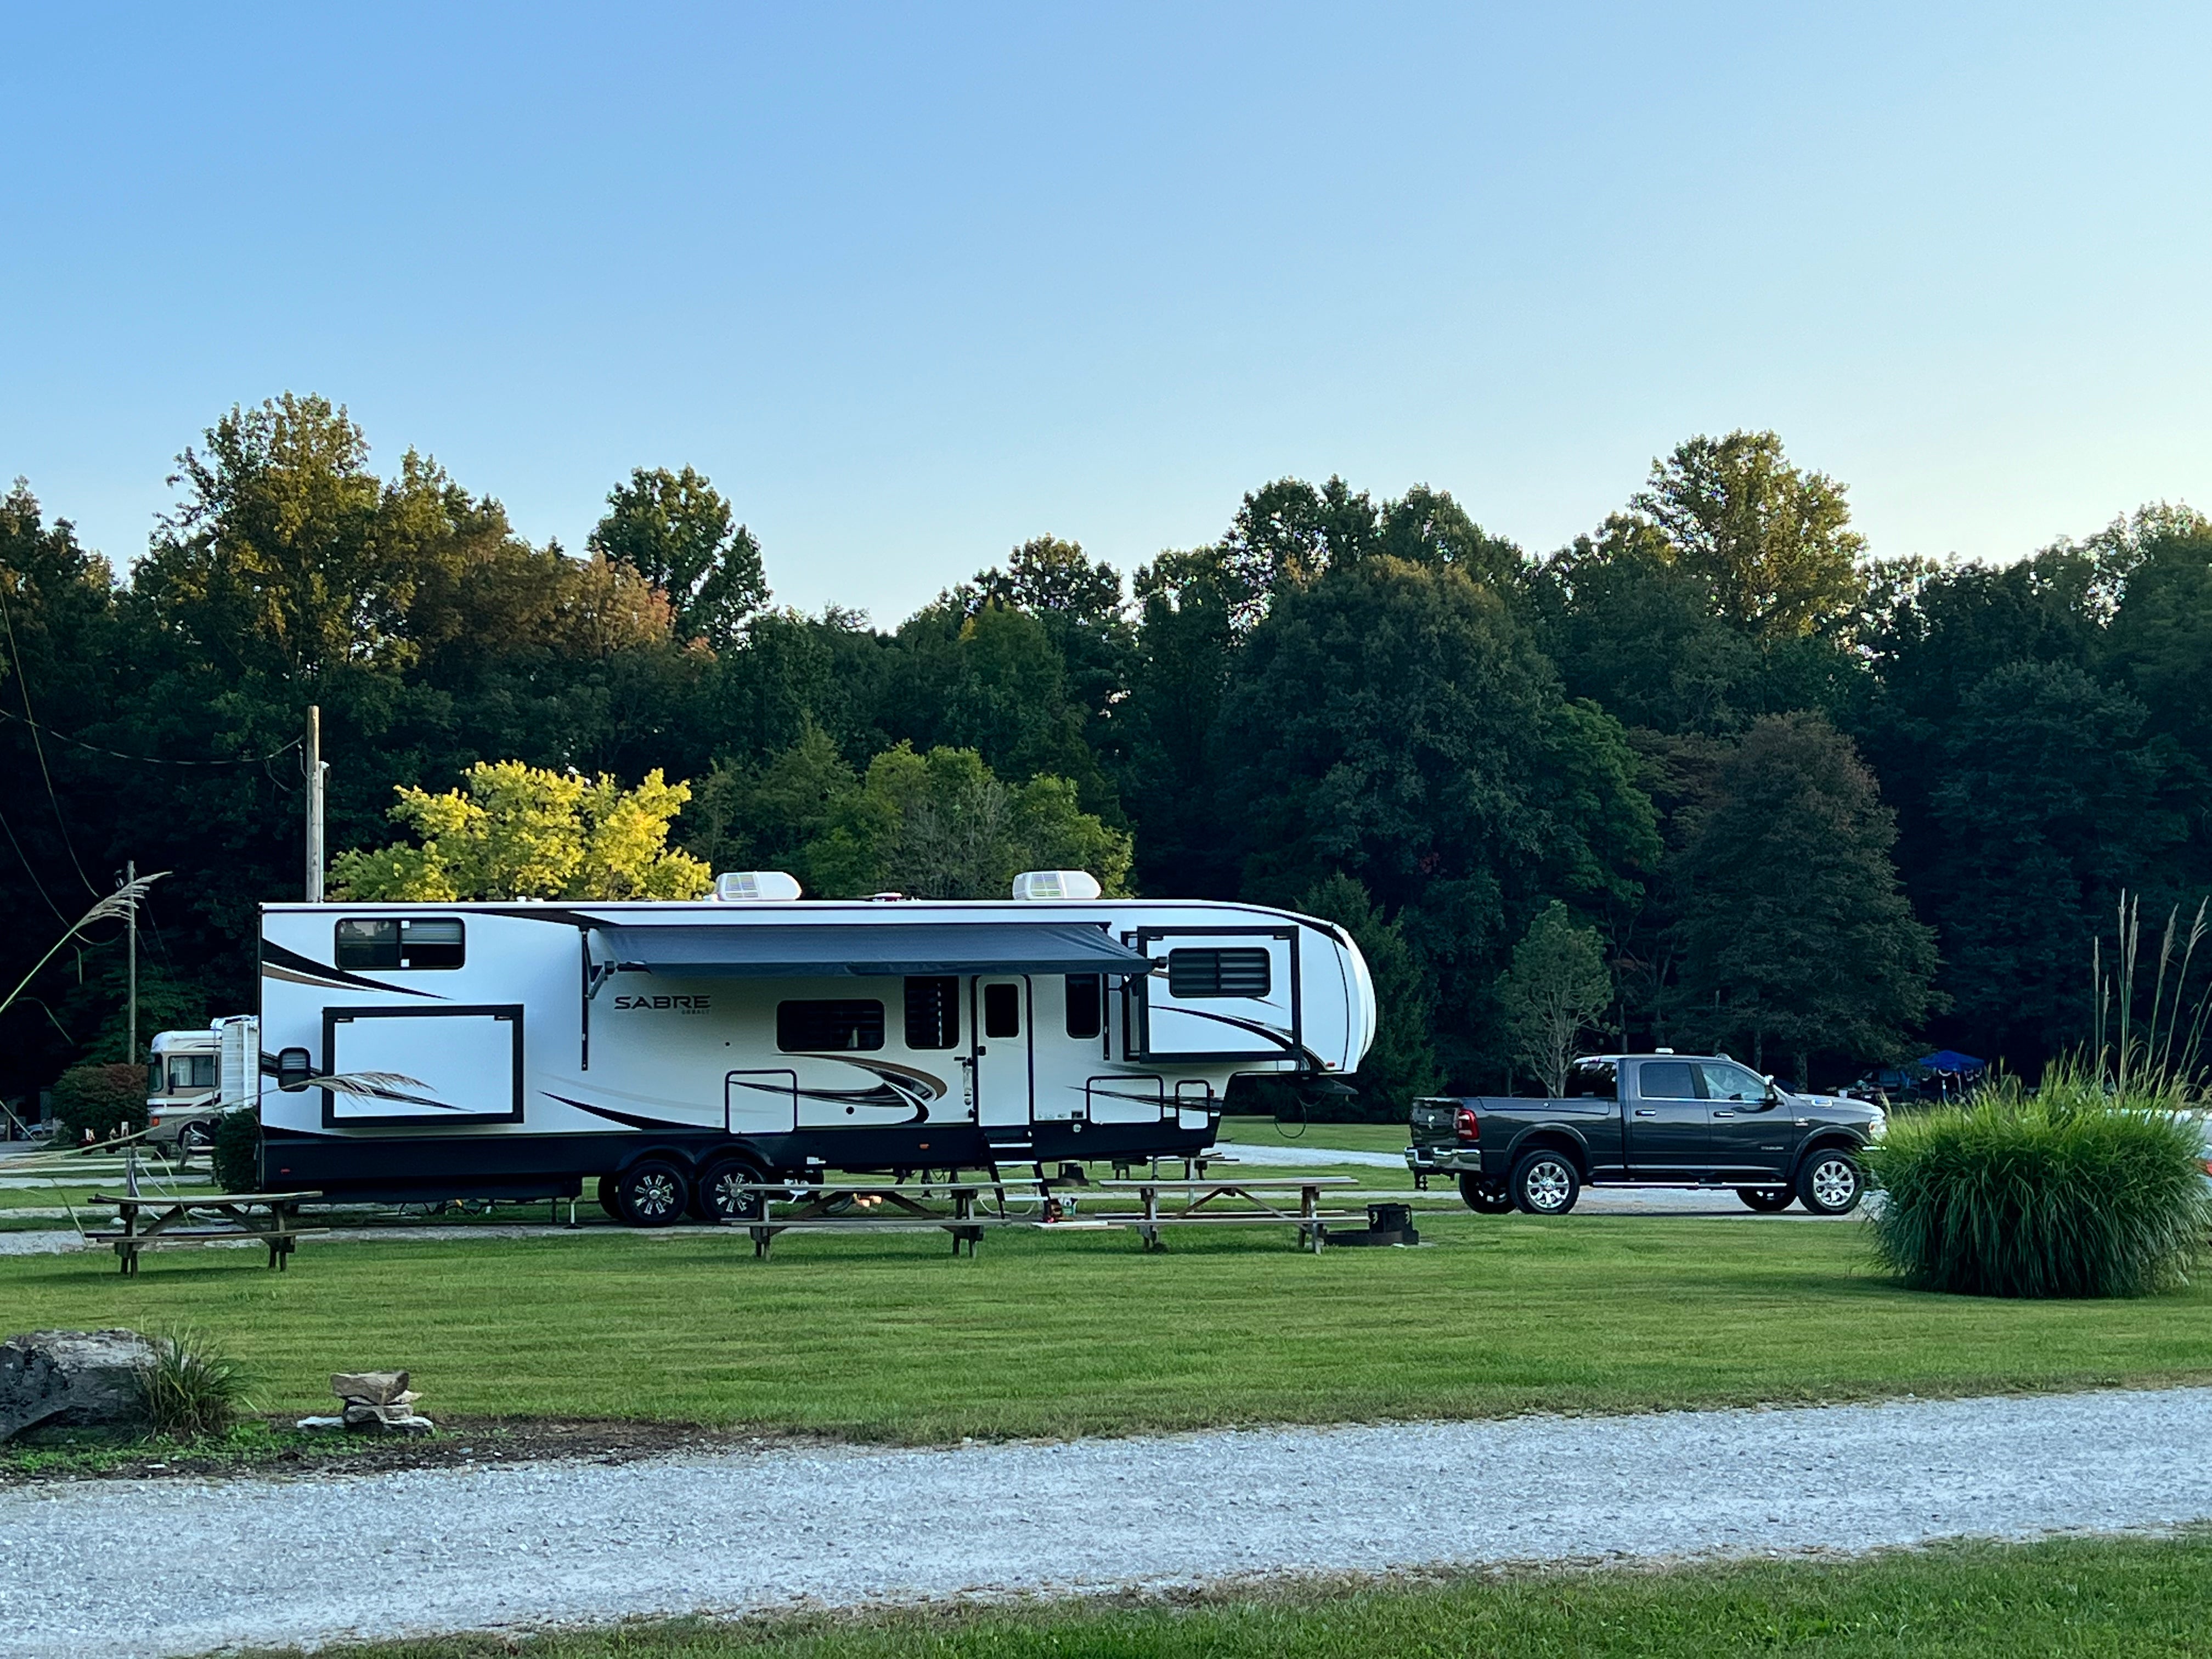 Camper submitted image from Muscatatuck Jennings County Park - 1